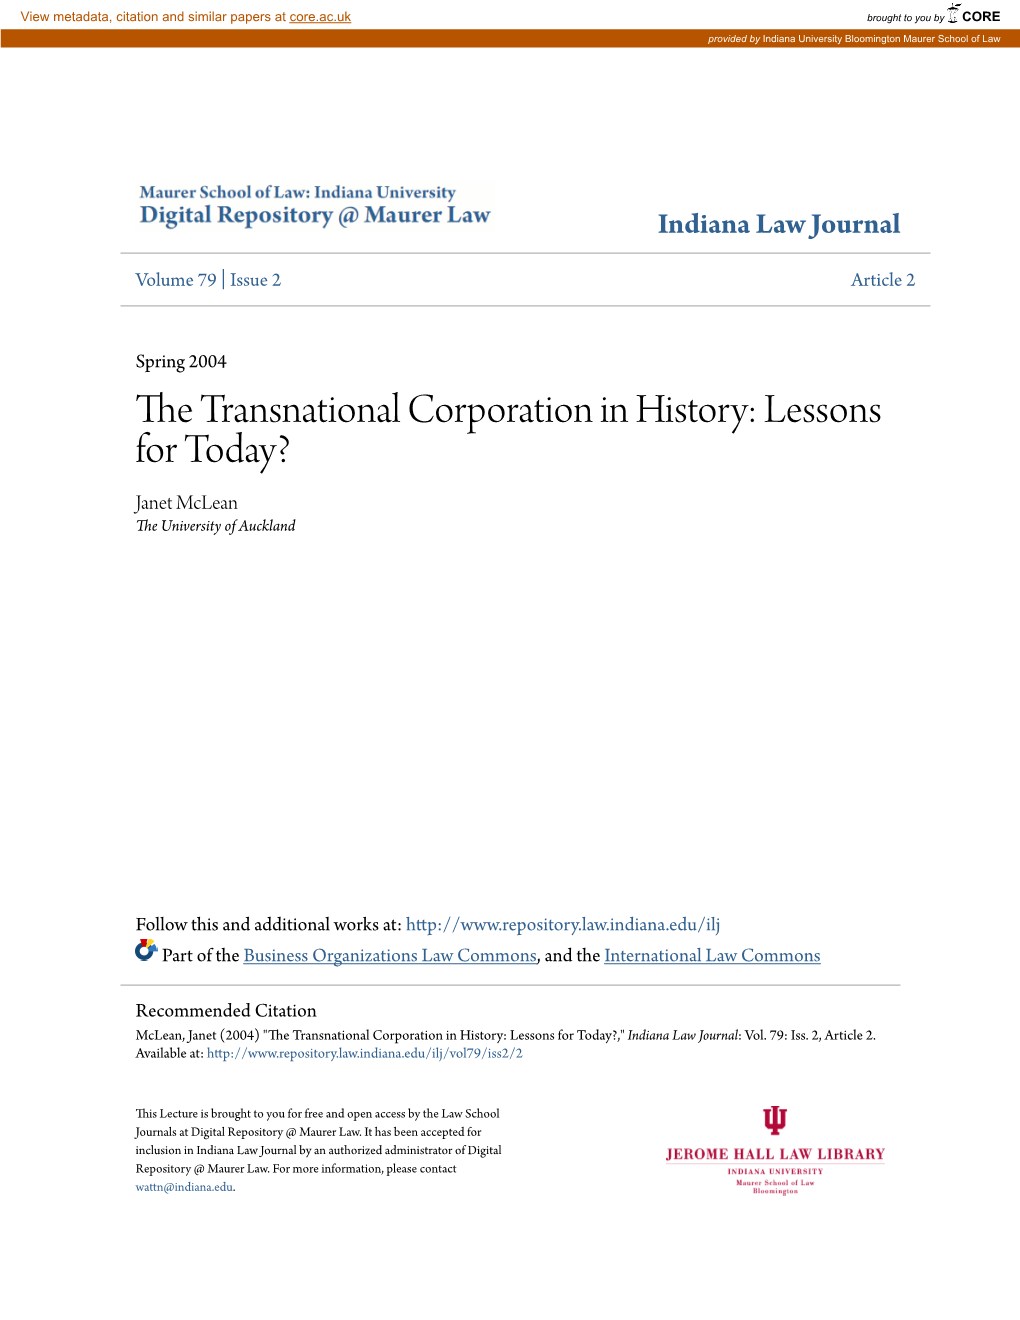 The Transnational Corporation in History: Lessons for Today?